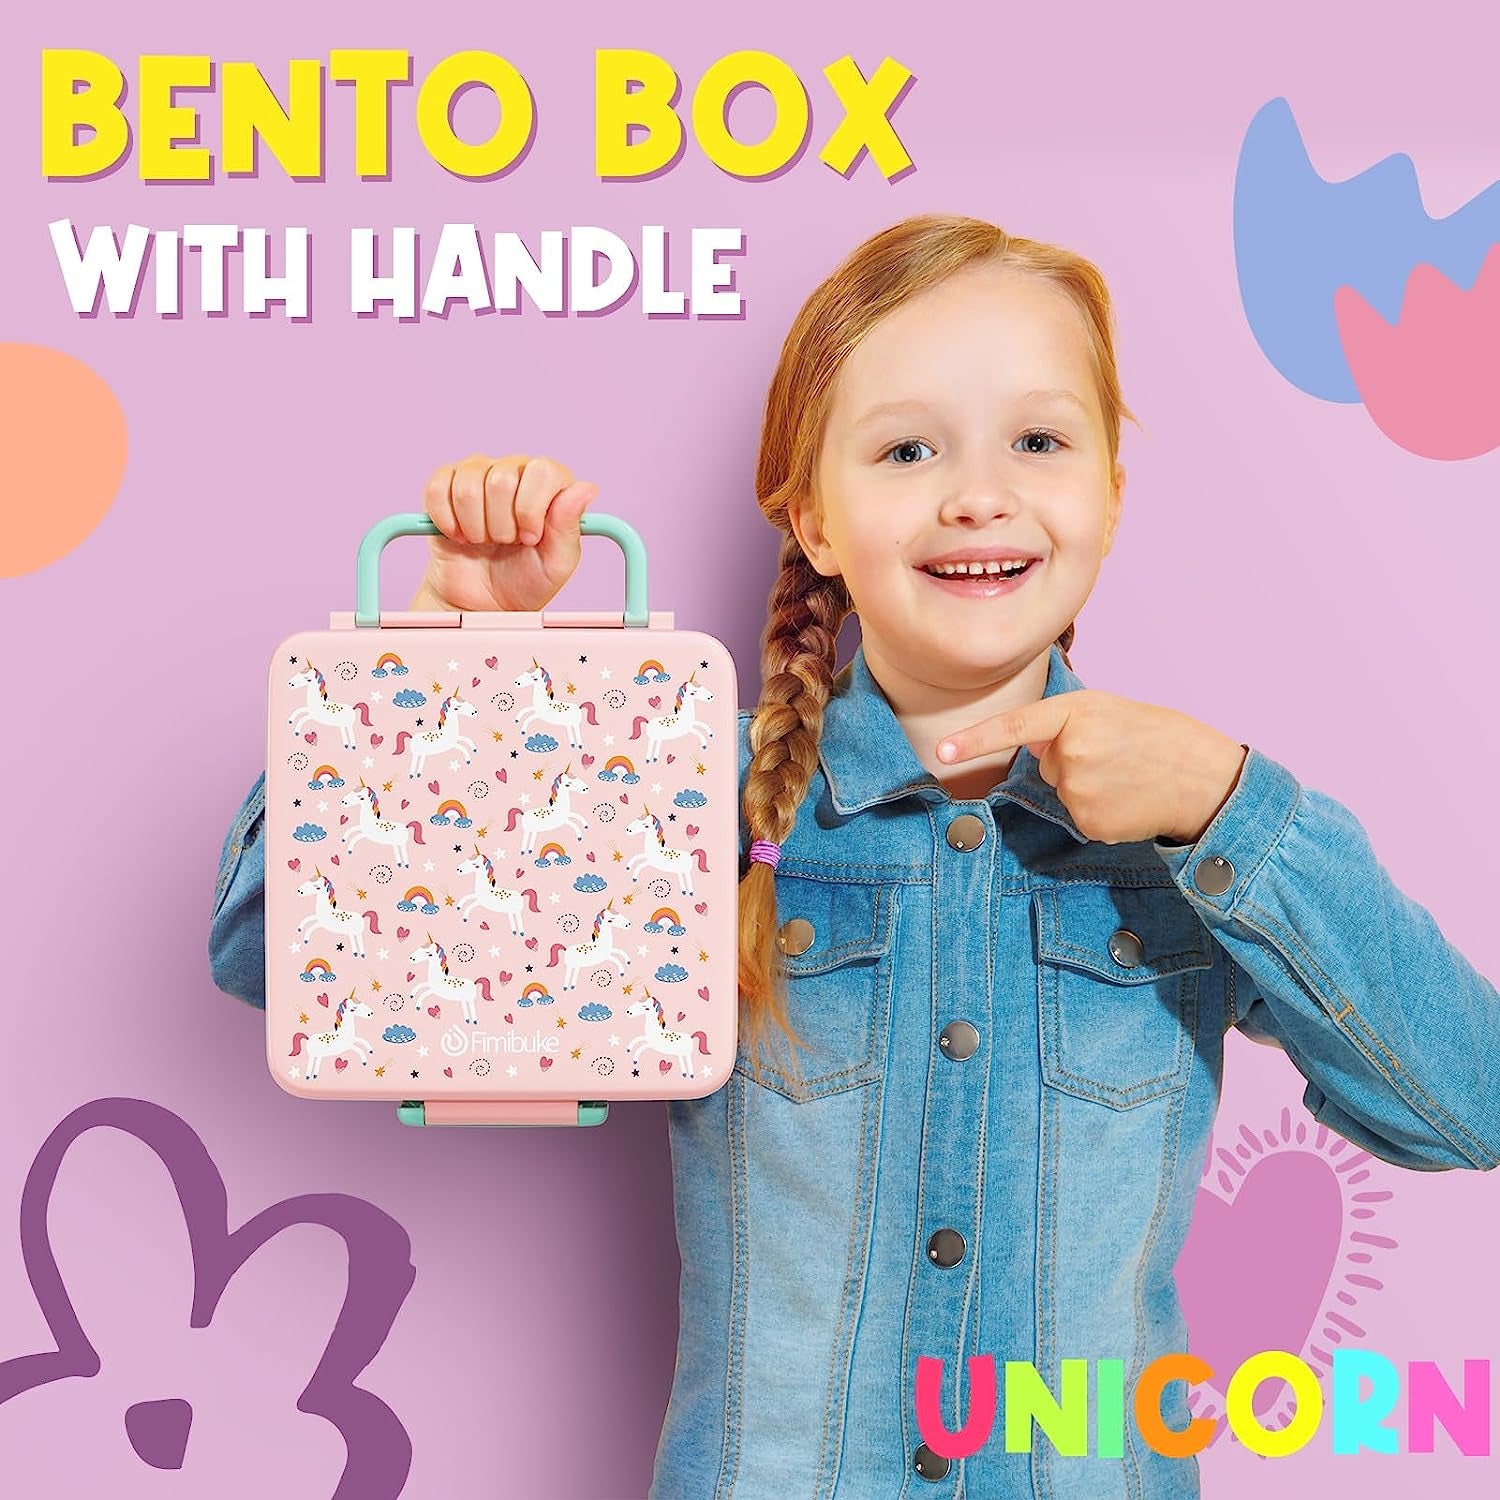 Bento Lunch Box for Kids - Leak Proof Toddler Bento Box with 4 Compartments BPA Free Dishwasher Safe Lunch Container with Utensils, Ideal Portion Sizes for Ages 3-12 Girls Boys for School